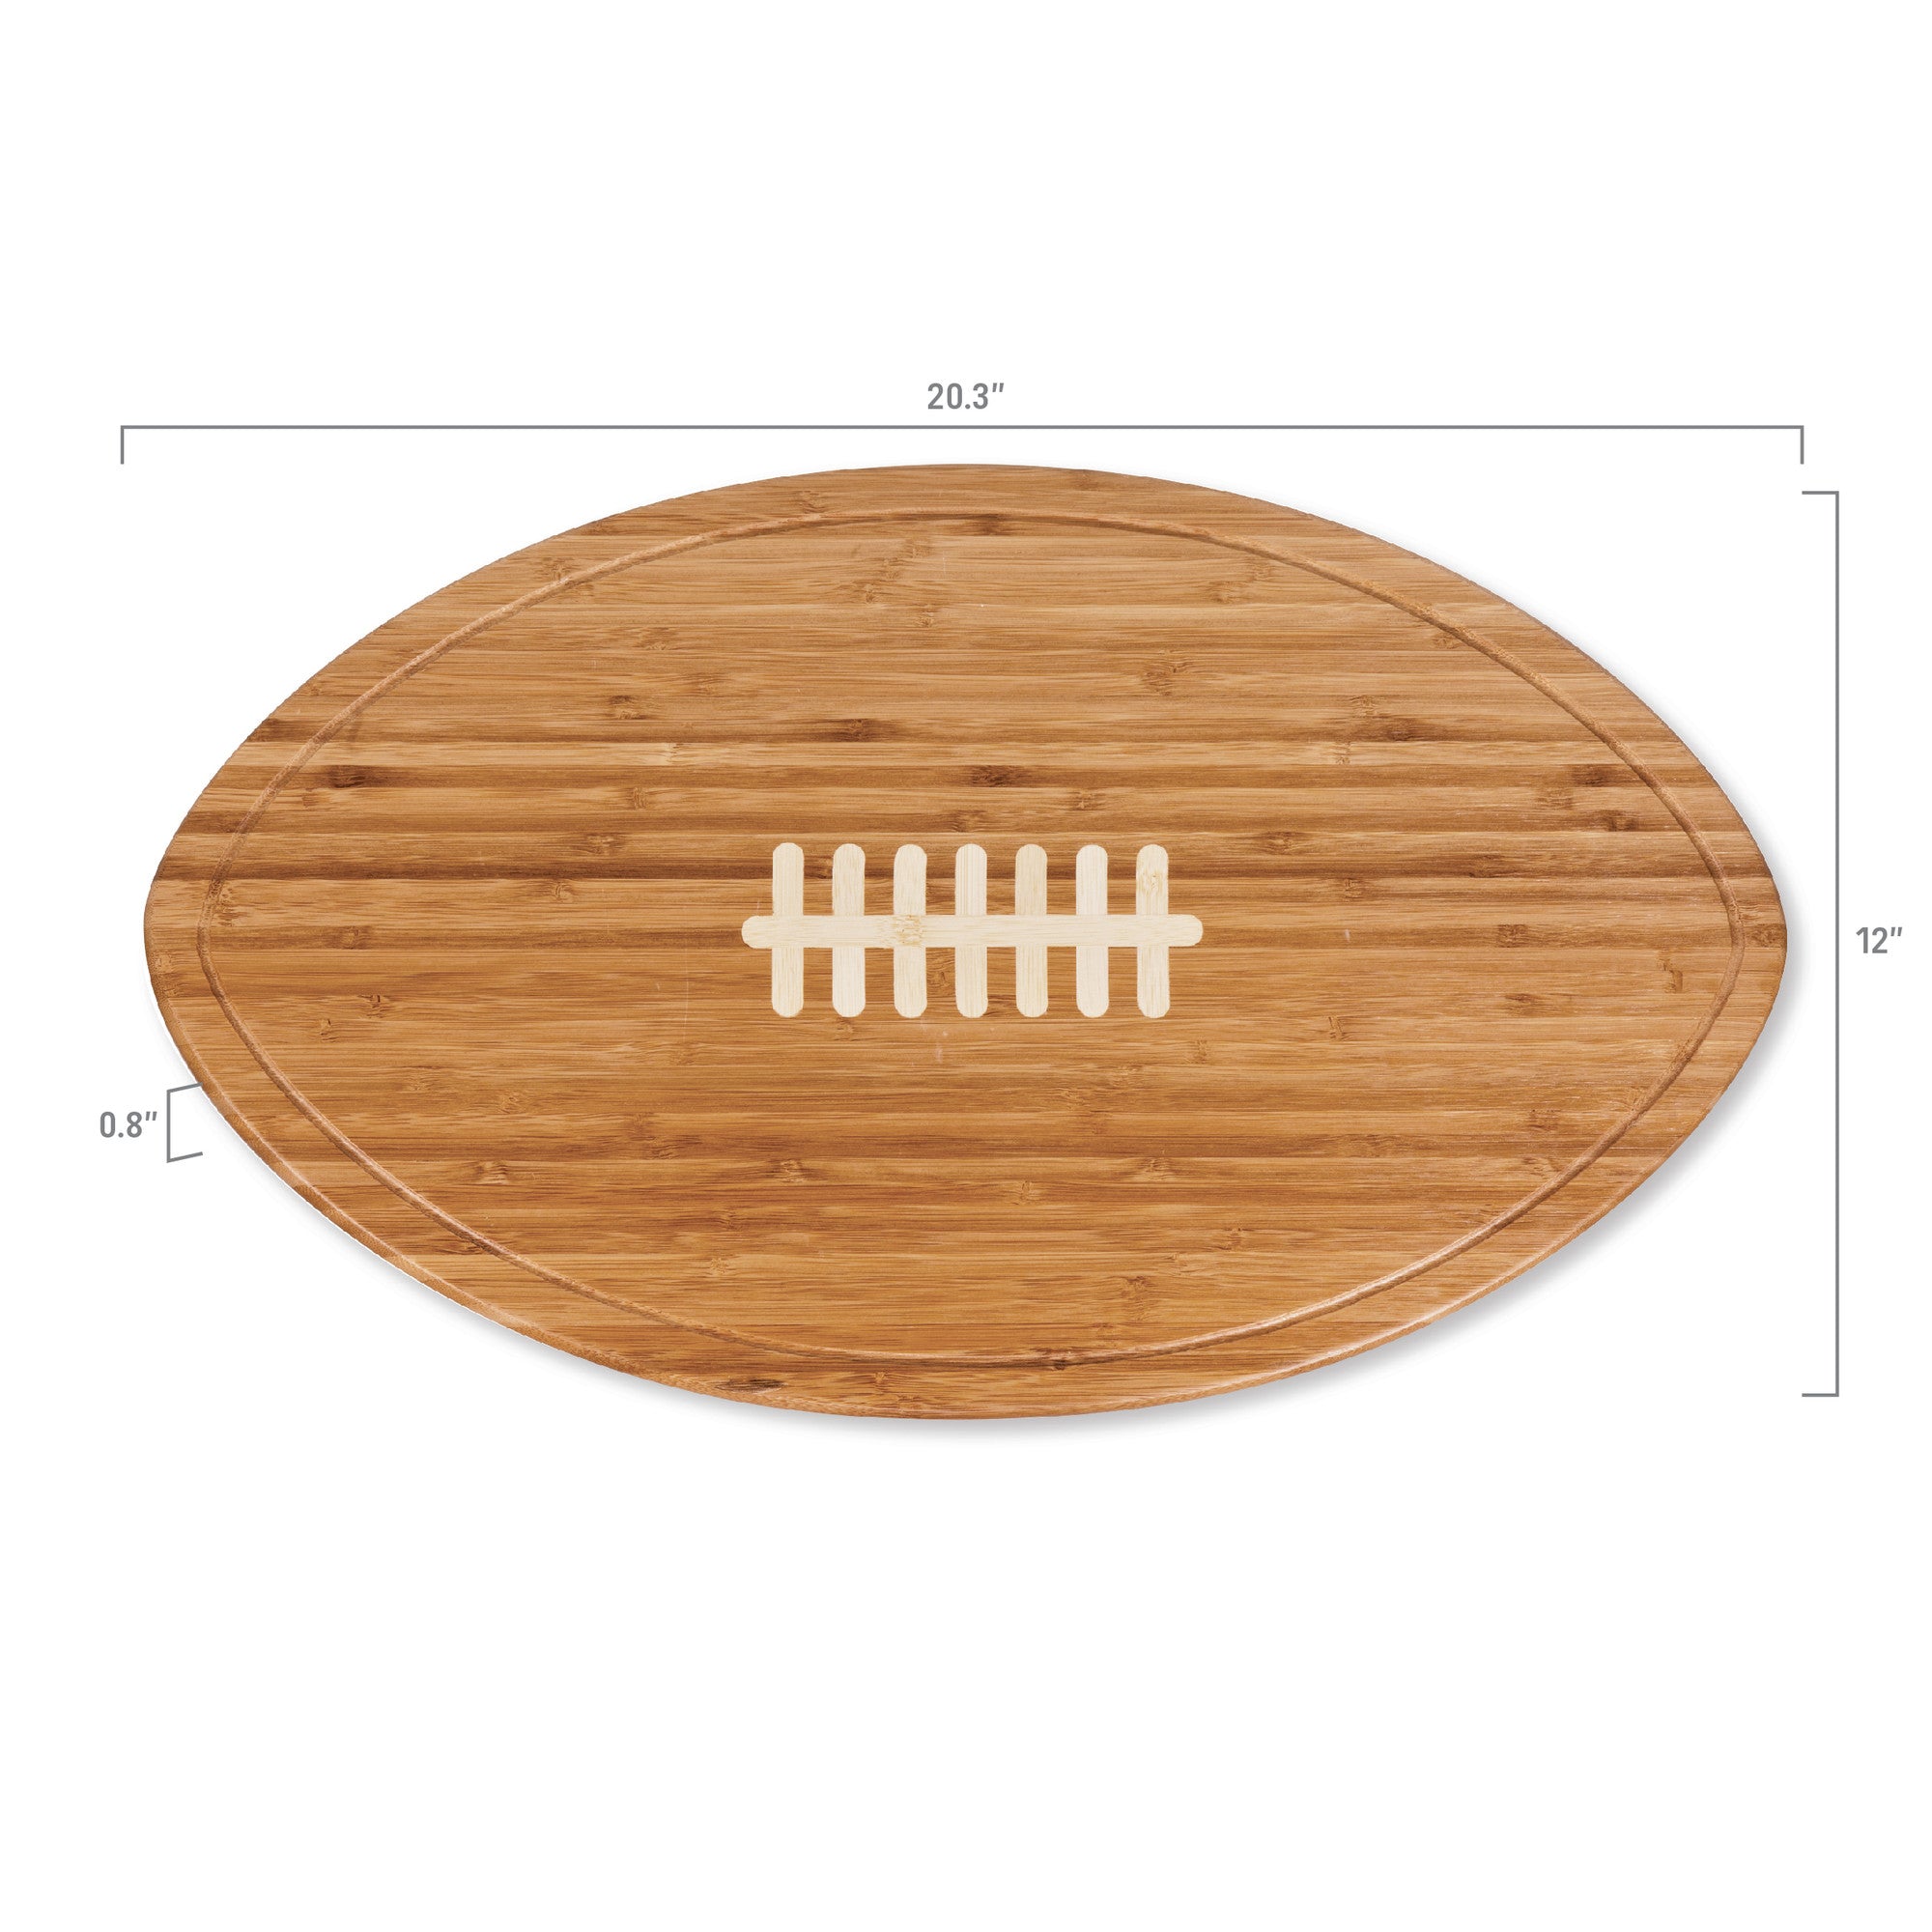 NC State Wolfpack - Kickoff Football Cutting Board & Serving Tray